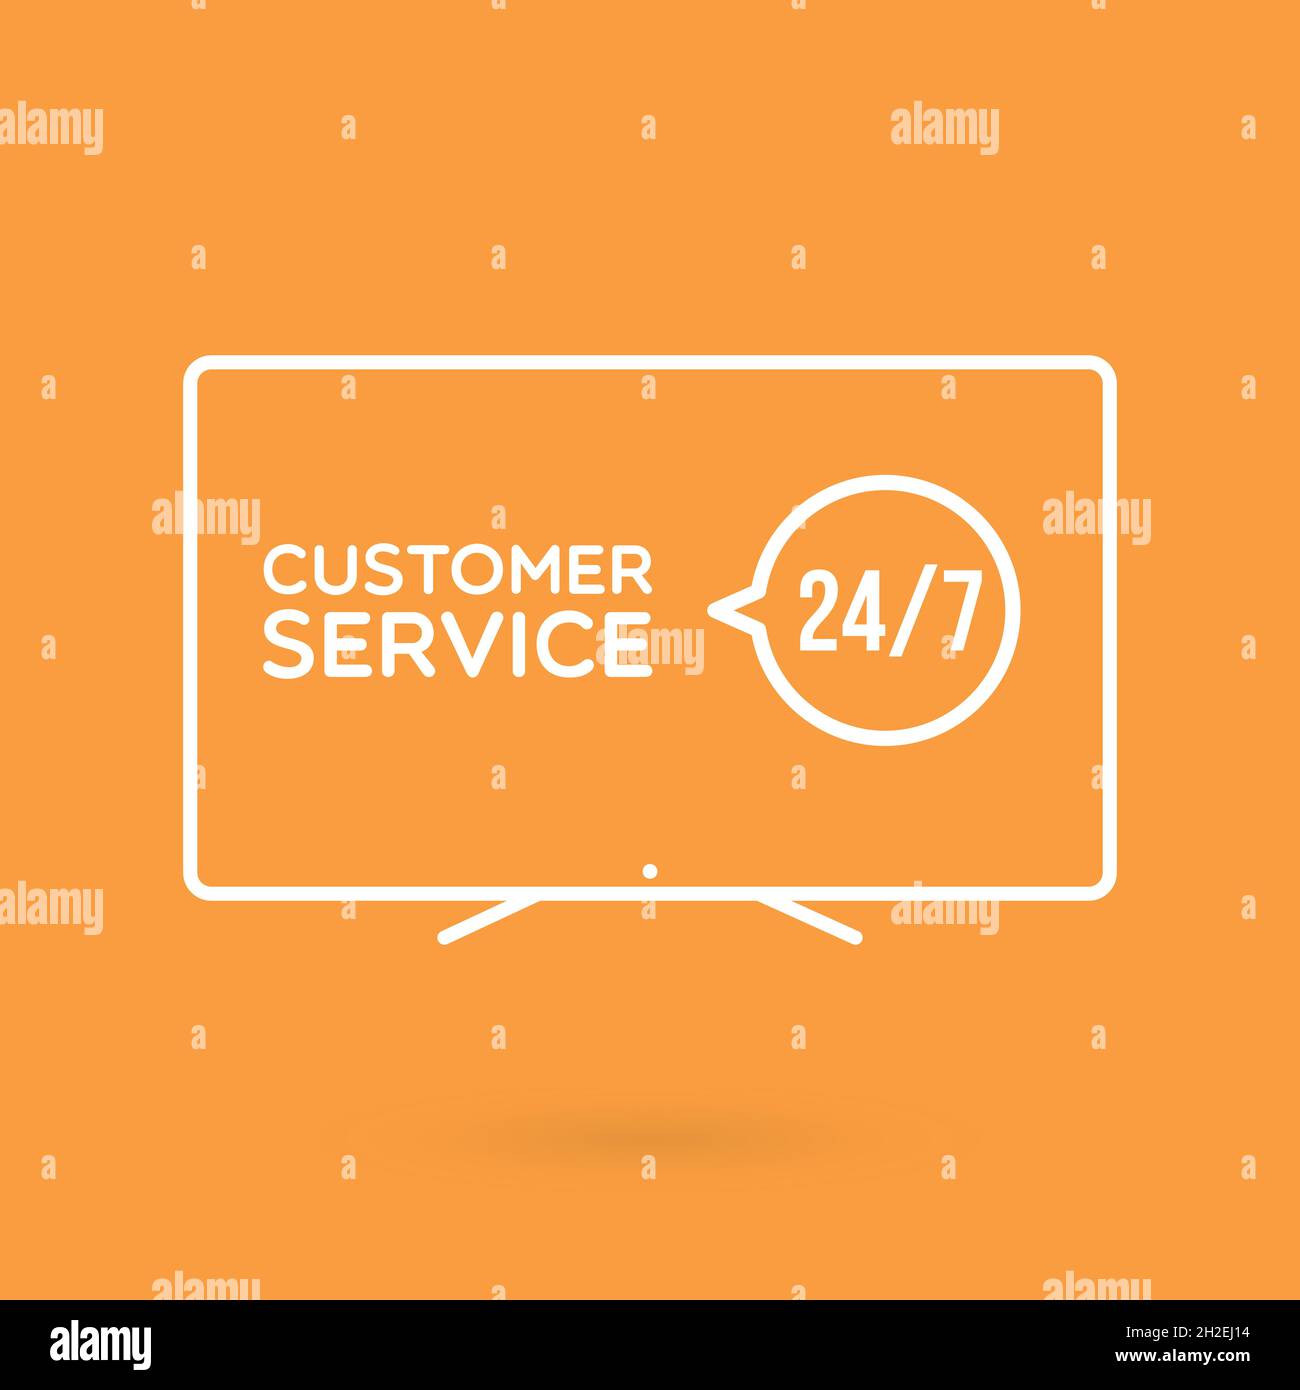 TV screen customer service 24/7 illustration. Concept of 24/7, open 24 hours, support, assistance, contact, customer service. Vector illustration, fla Stock Vector